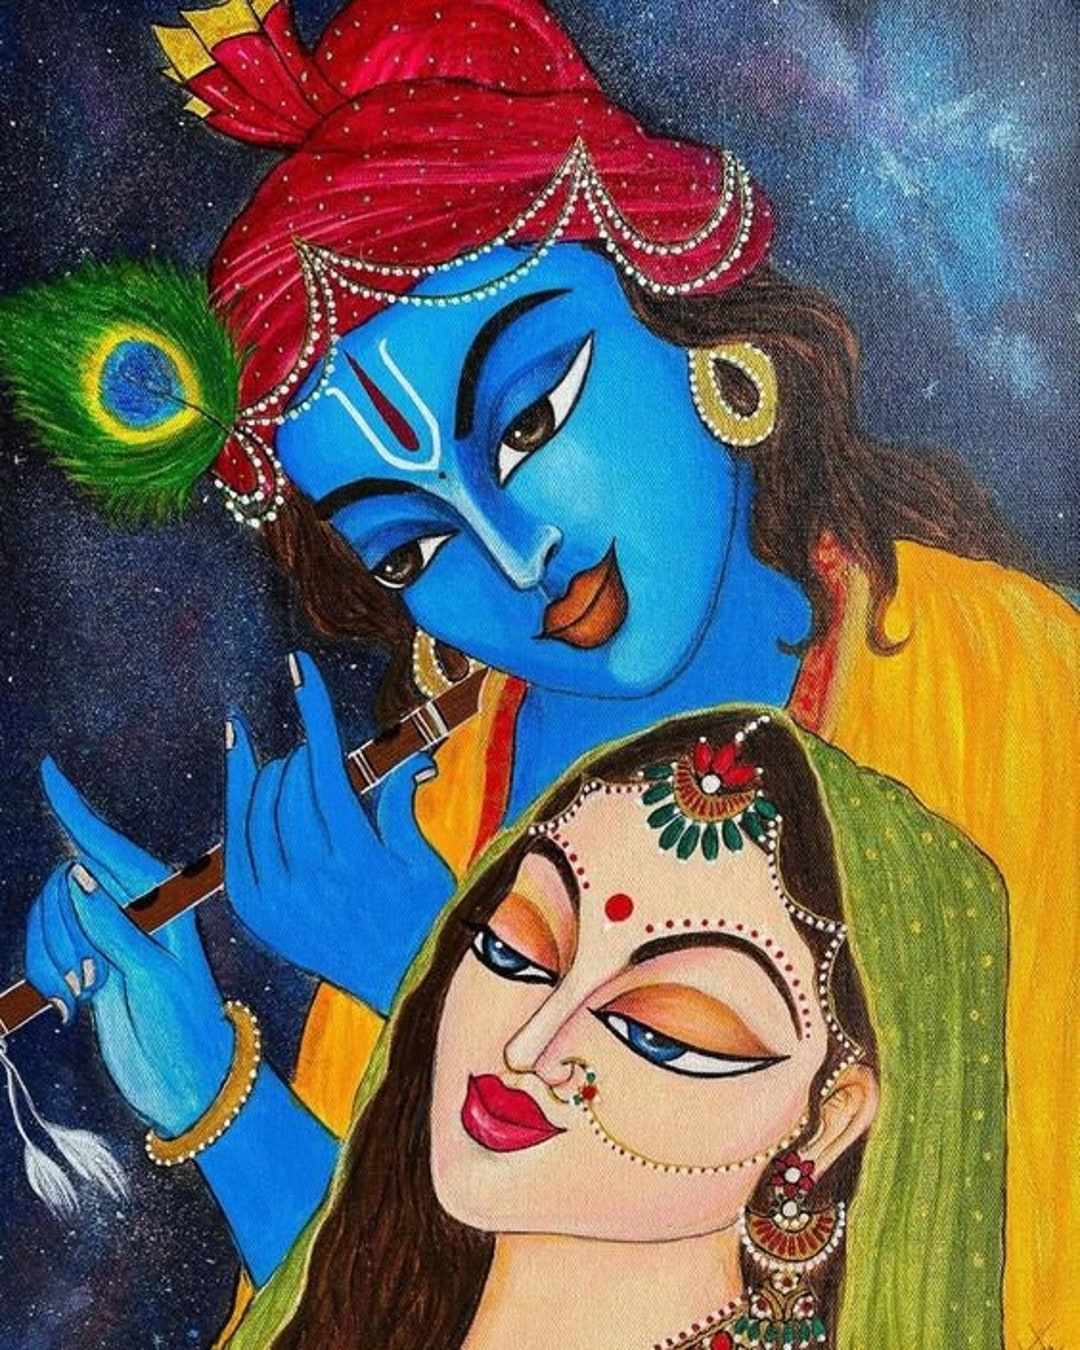 Buy Lord Krishna and Radha A Hand Painted Painting on Canvas ...